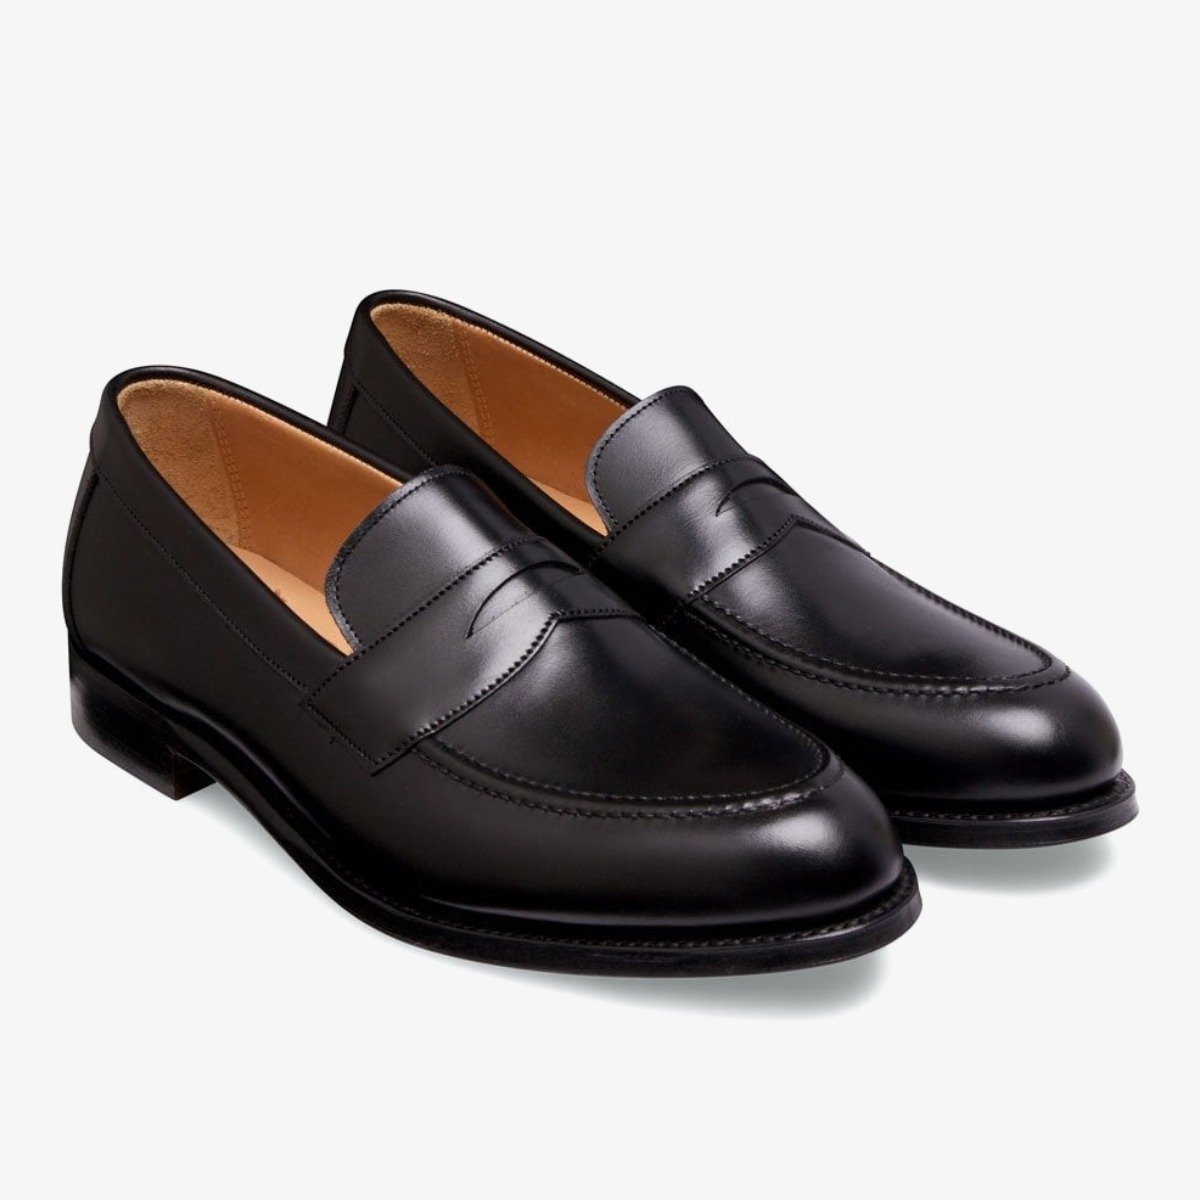 Cheaney Hadley black penny loafers